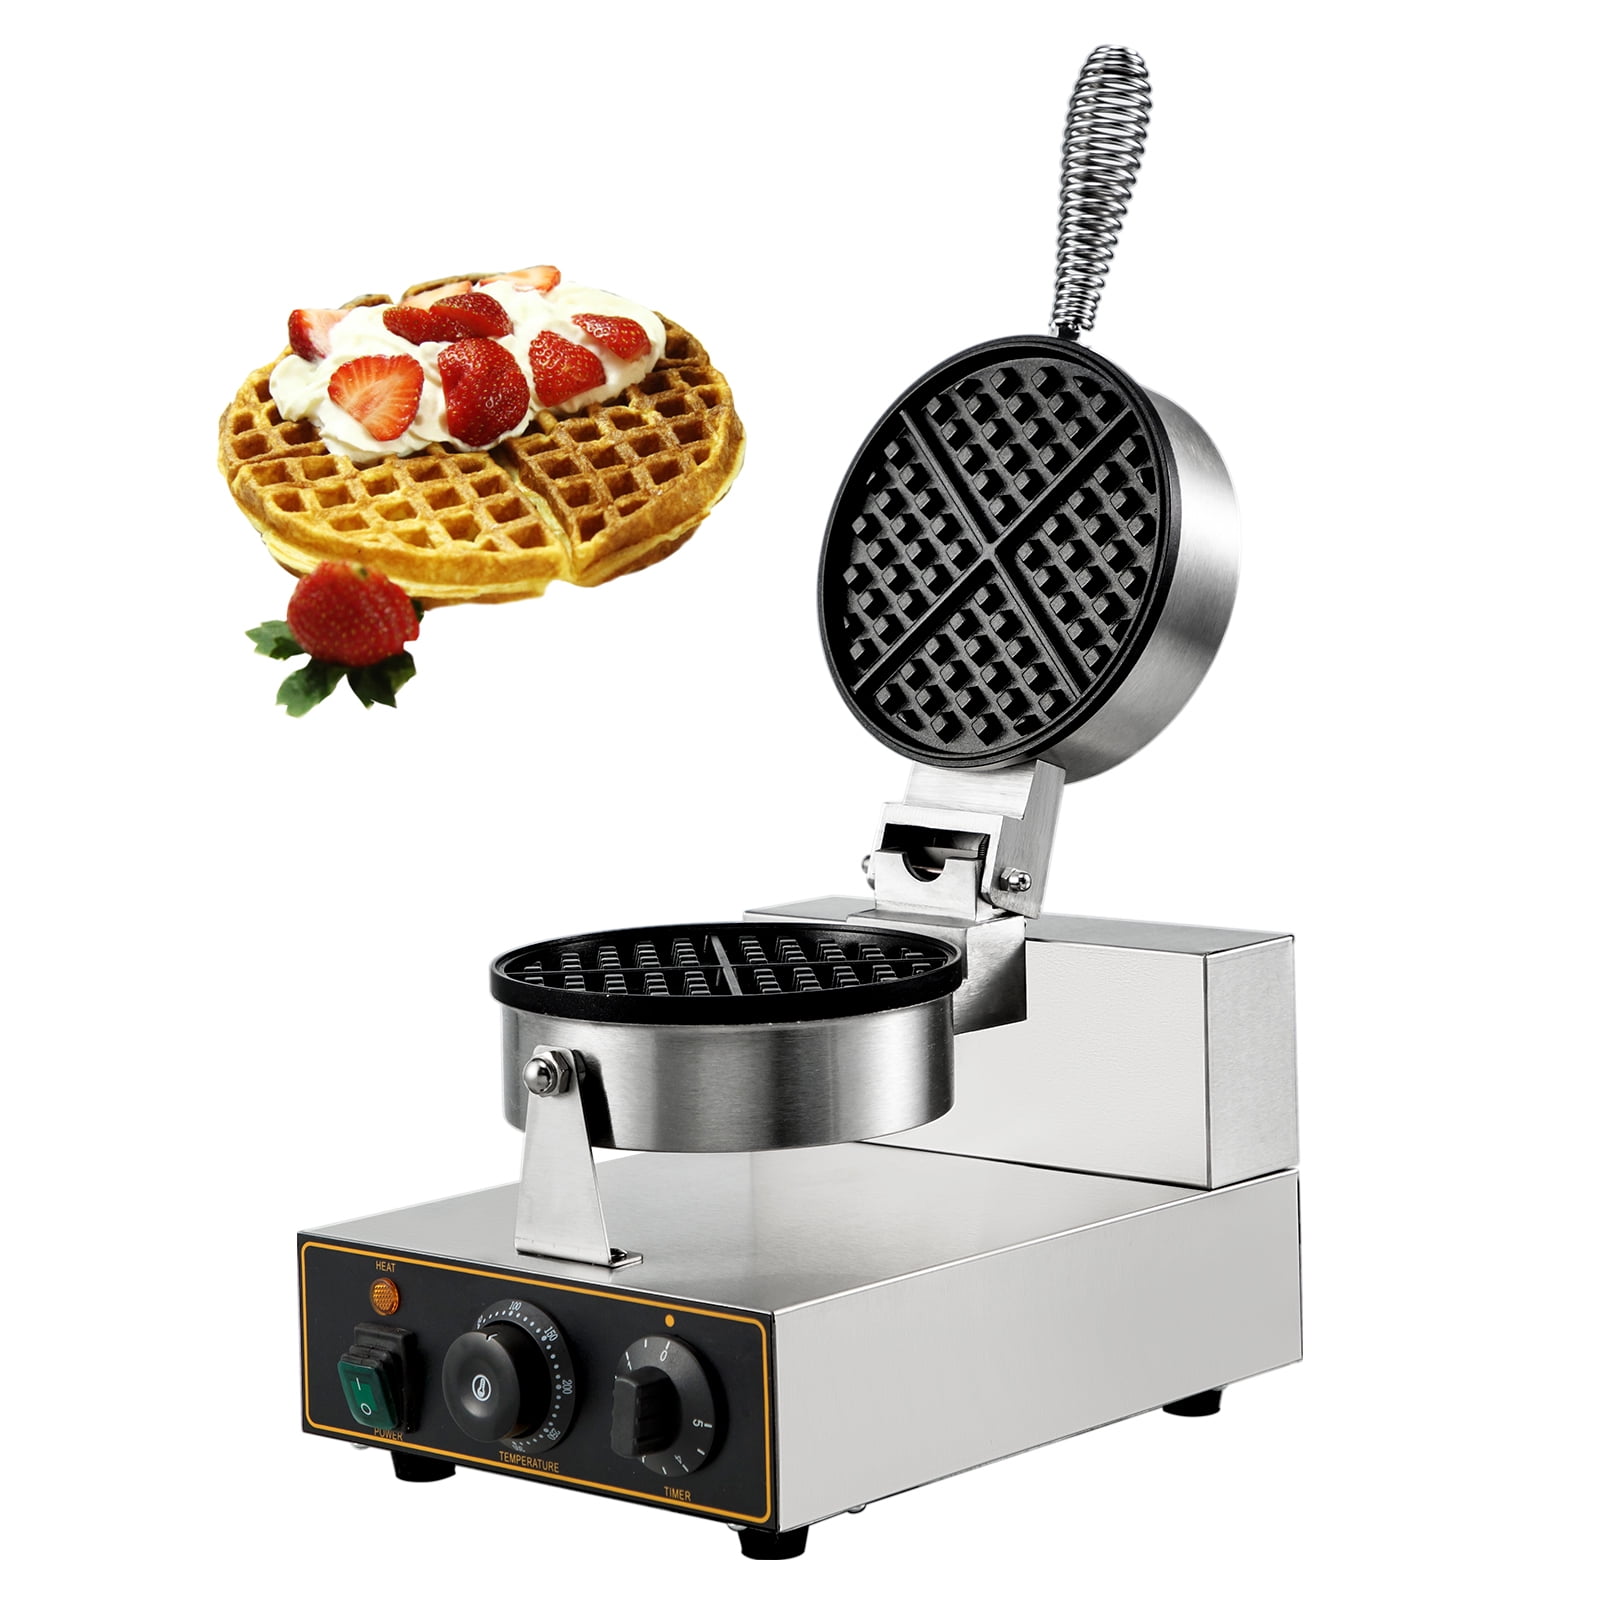 VEVOR 1750-Watt Commercial Round Waffle Maker 4-Waffle Stainless Steel Nonstick Electric Muffin Machine Belgian Waffle Maker